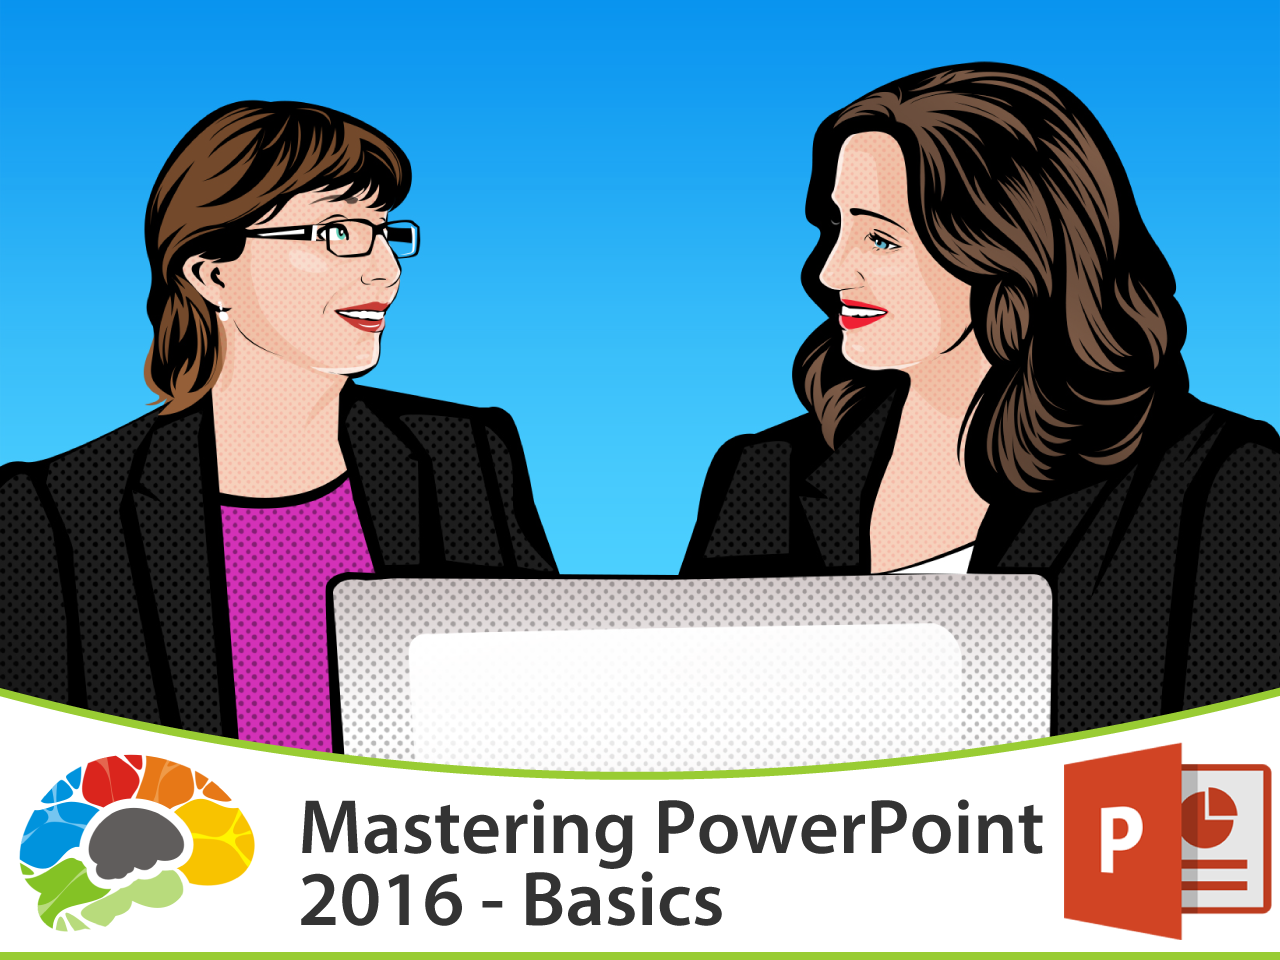 Mastering PowerPoint 2016 (full course), Singapore elarning online course